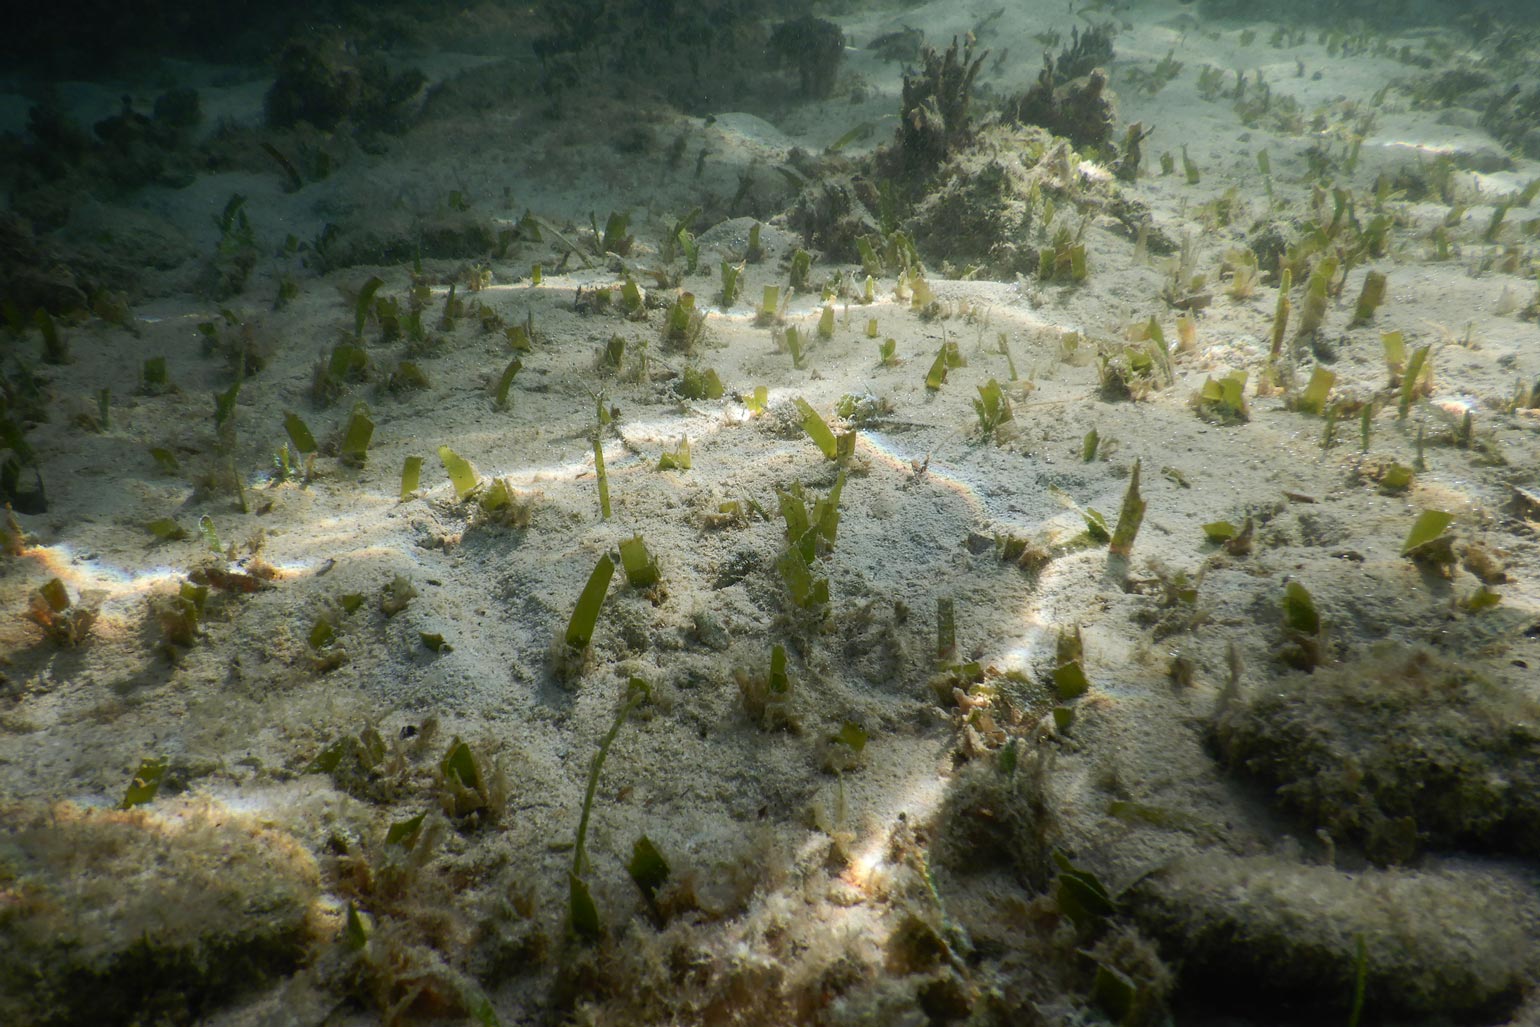 Bermuda's declining seagrass beds